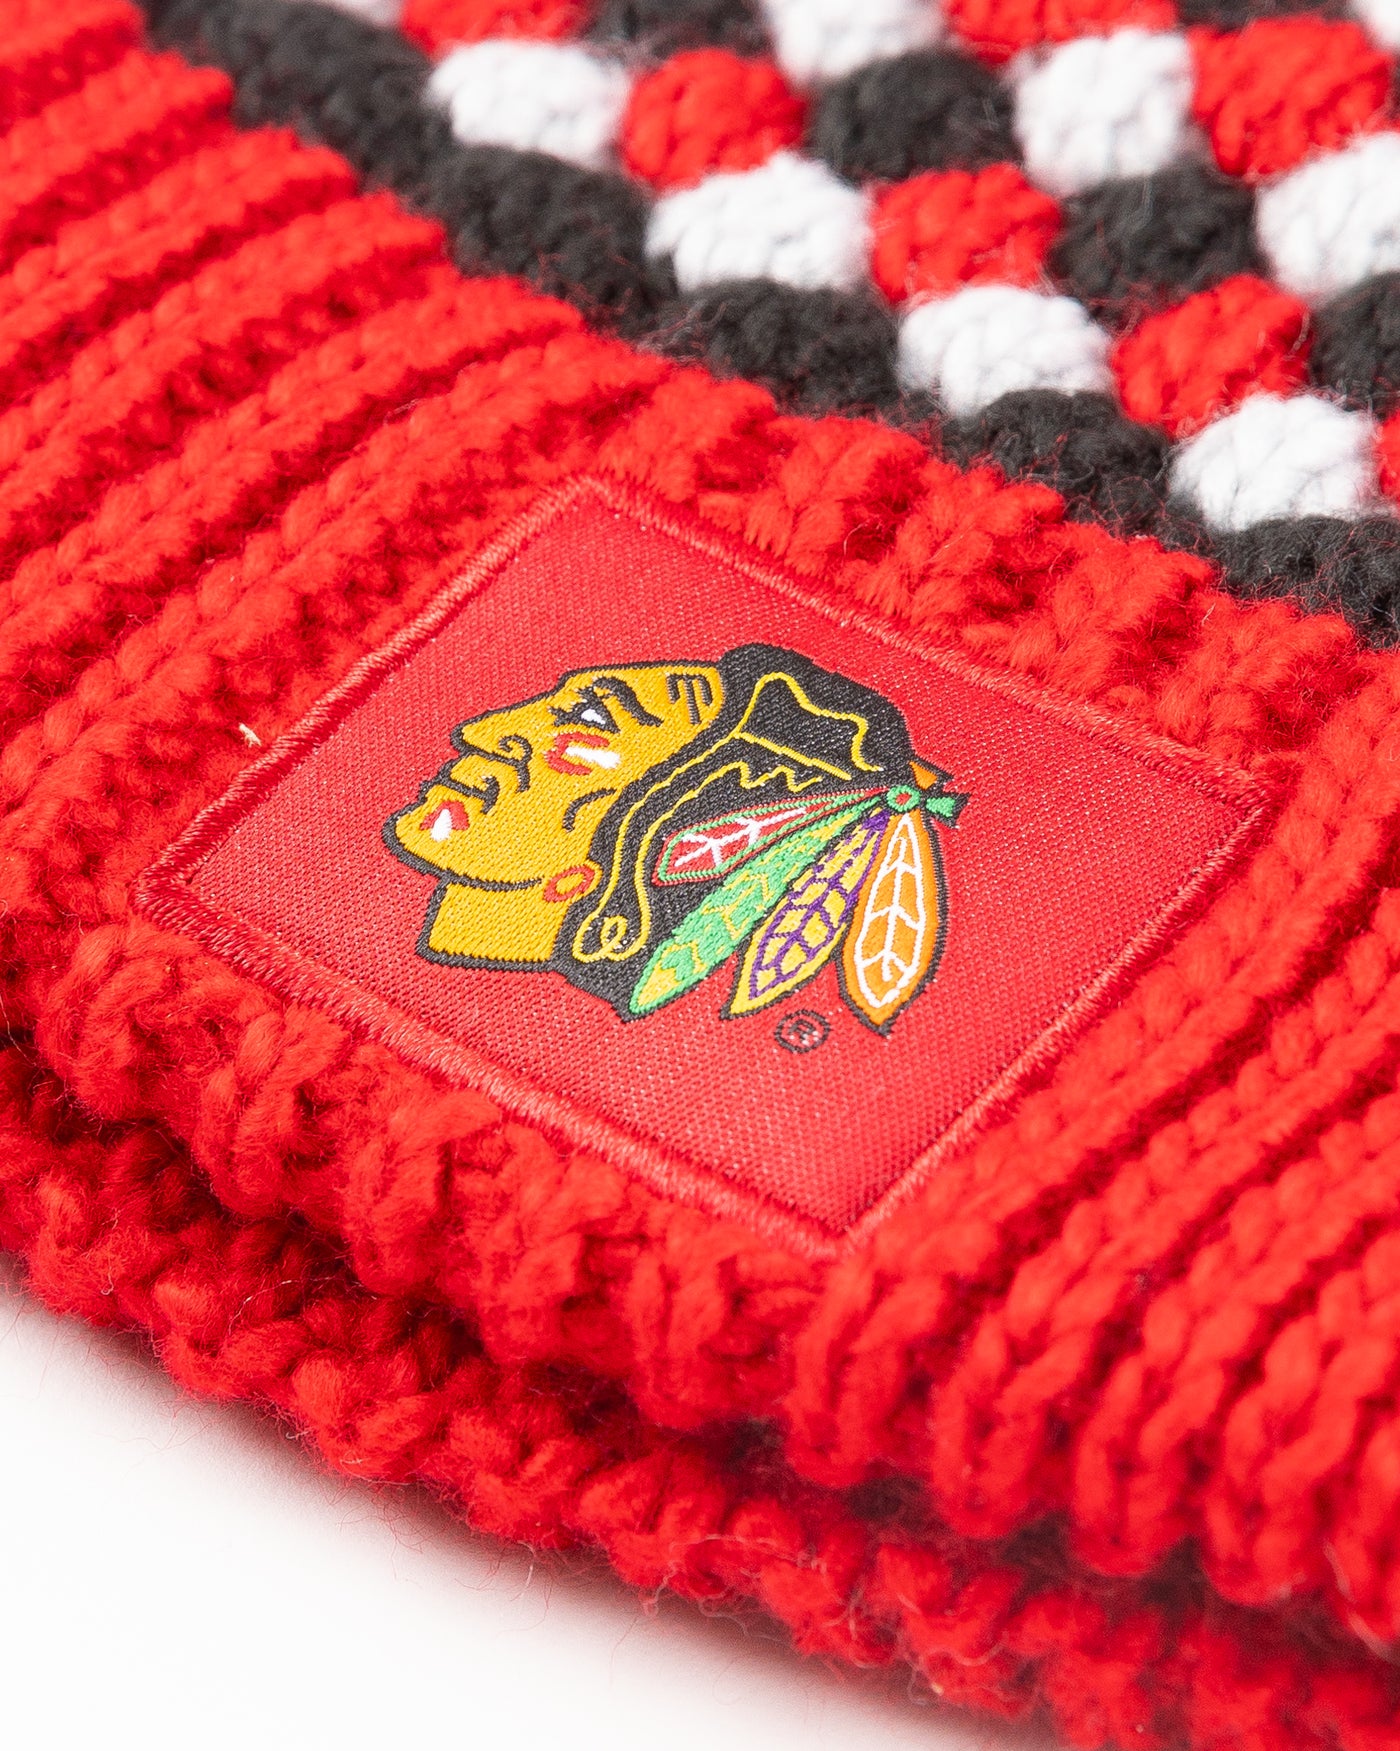 red black and white Colosseum Operation Hat Trick beanie with Chicago Blackhawks branding - detail lay flat